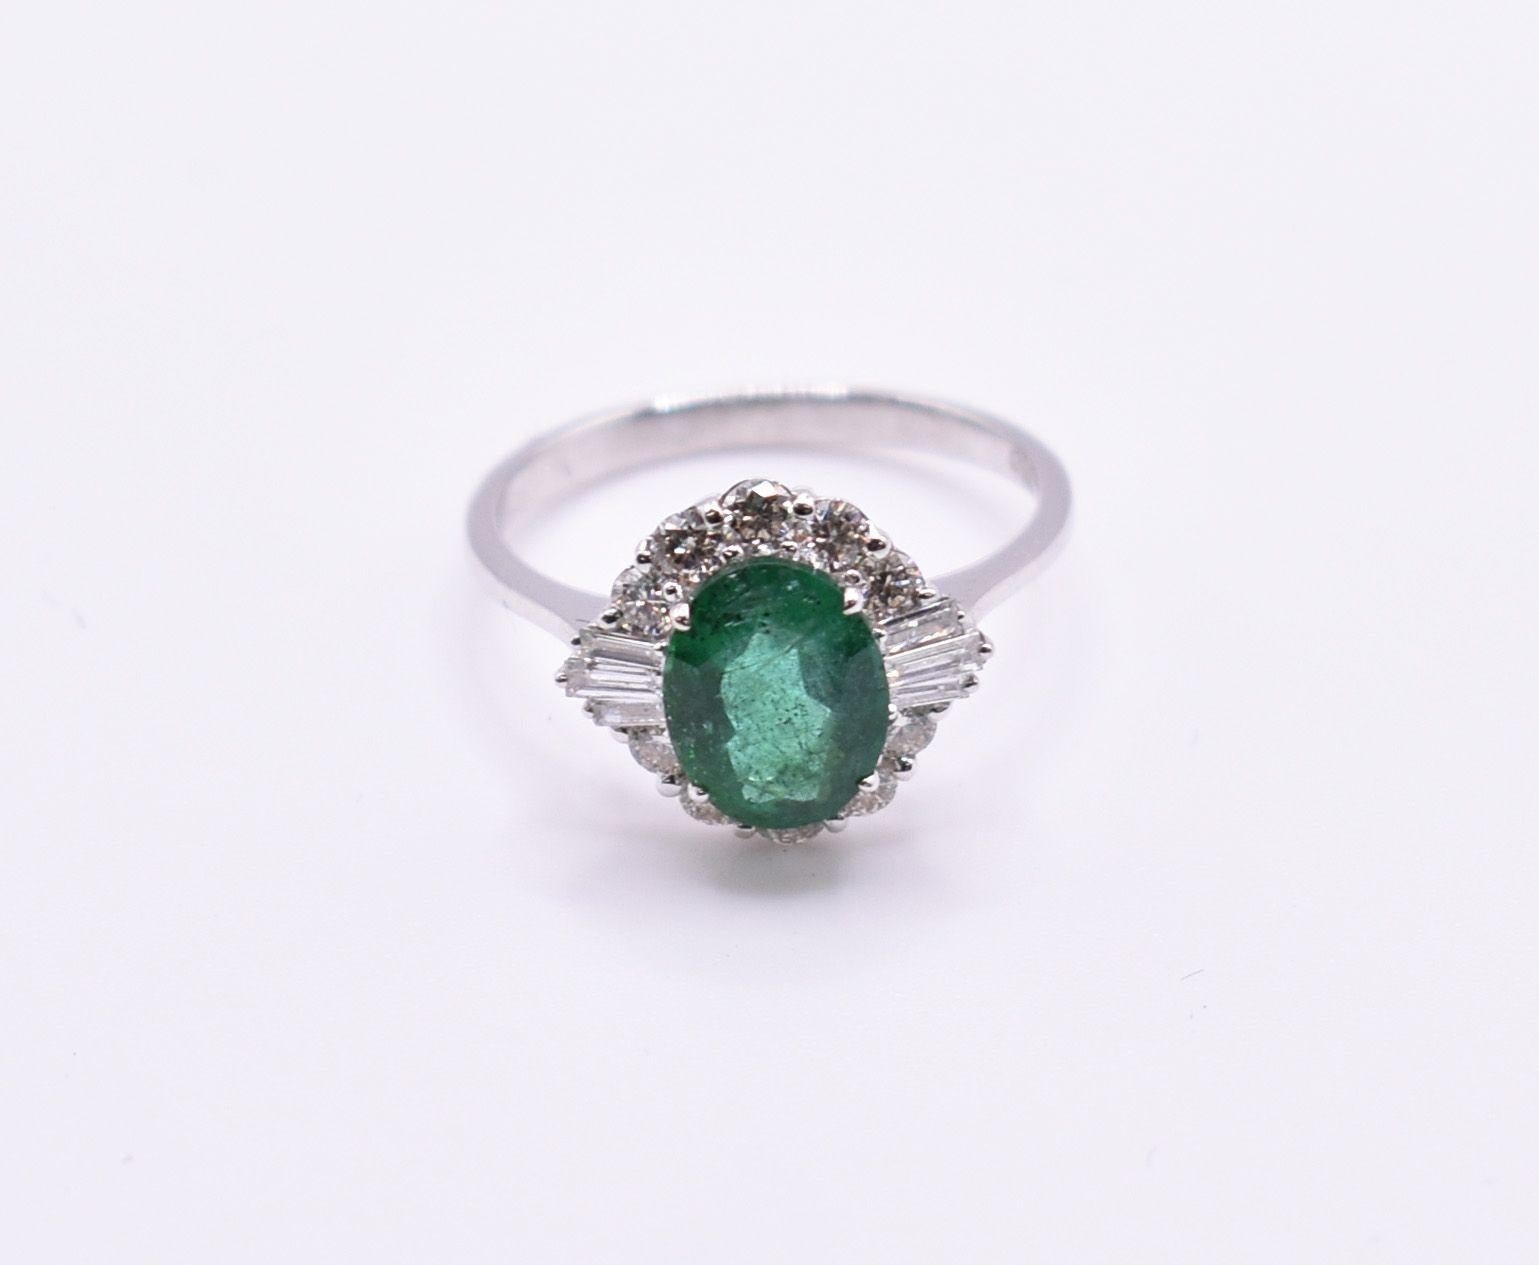 A splendid 18k white gold emerald & diamond ring. A good quality emerald, of Zambian origin, is 1.86ct, while the diamonds total 0.63ct. VS/SU/G/H Colour.

Ring Size UK: O US: 7

RRP: £3,995